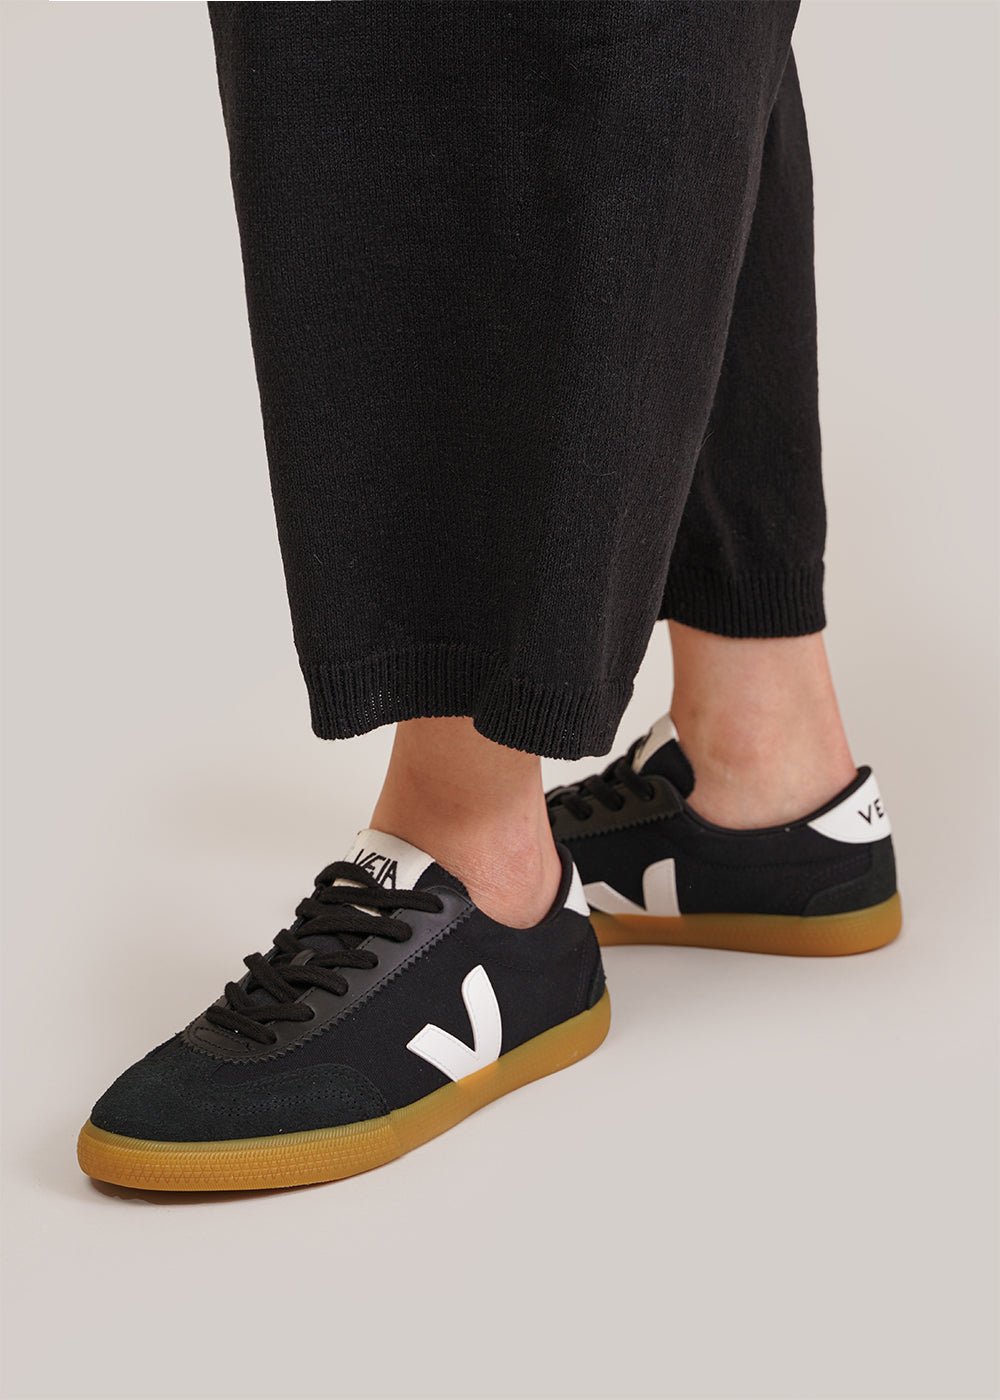 Veja Black White Natural Volley Canvas Sneakers - New Classics Studios Sustainable Ethical Fashion Canada